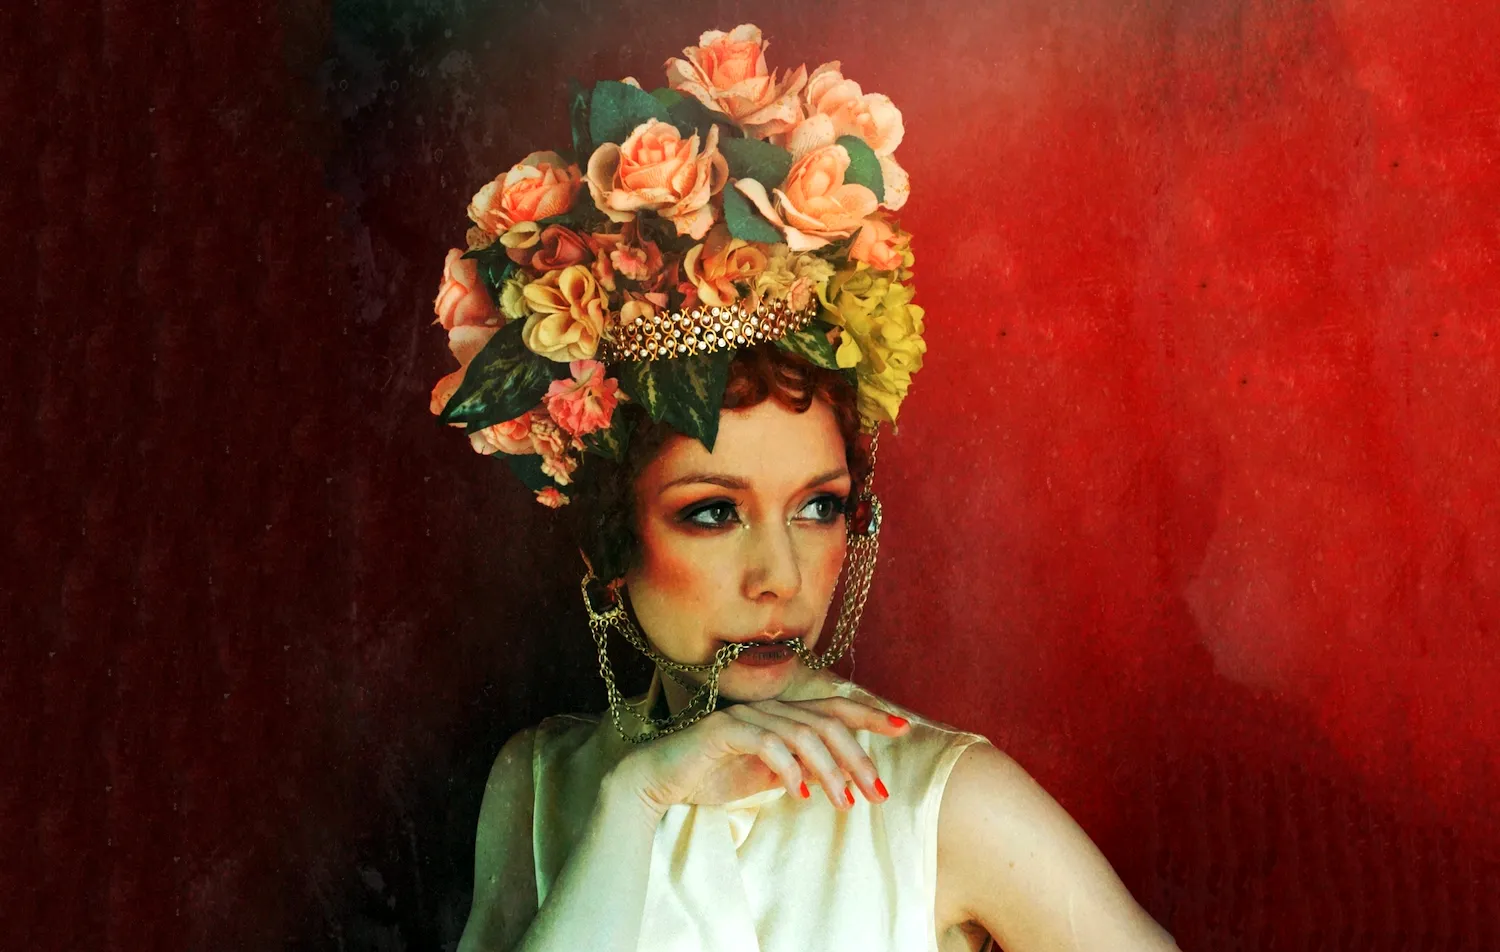 The Anchoress - Art of losing